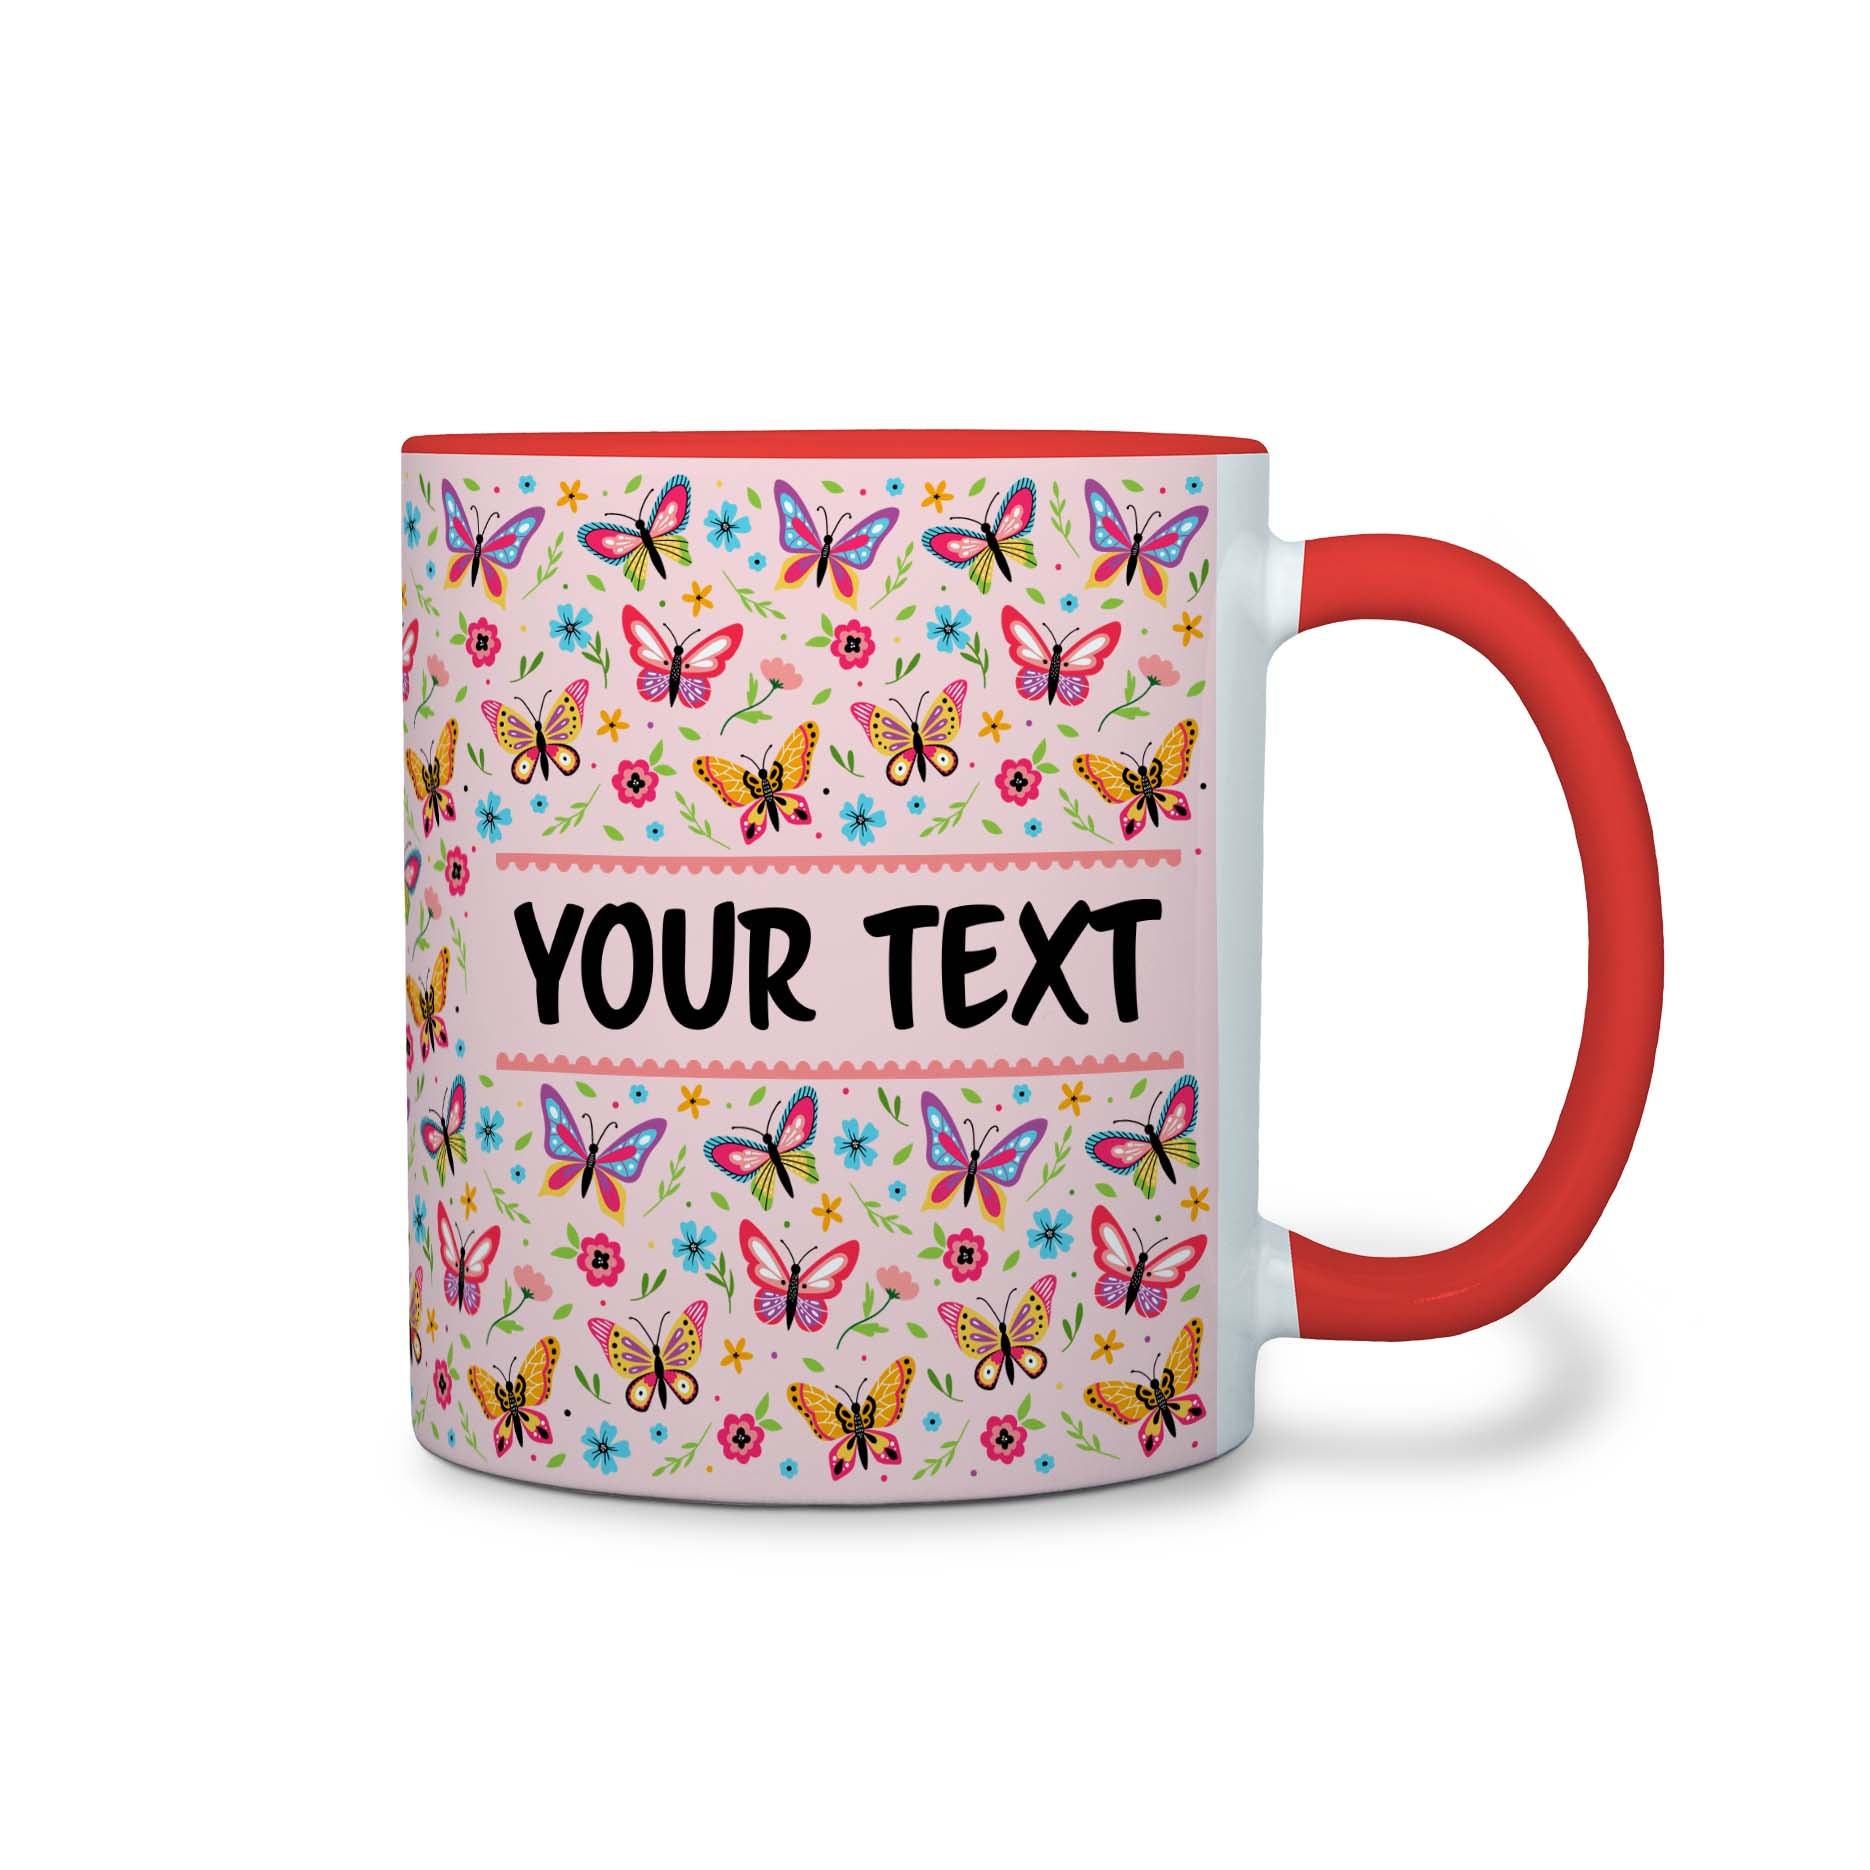 Personalized Red Accent Mug - Butterflies - 11 Ounces